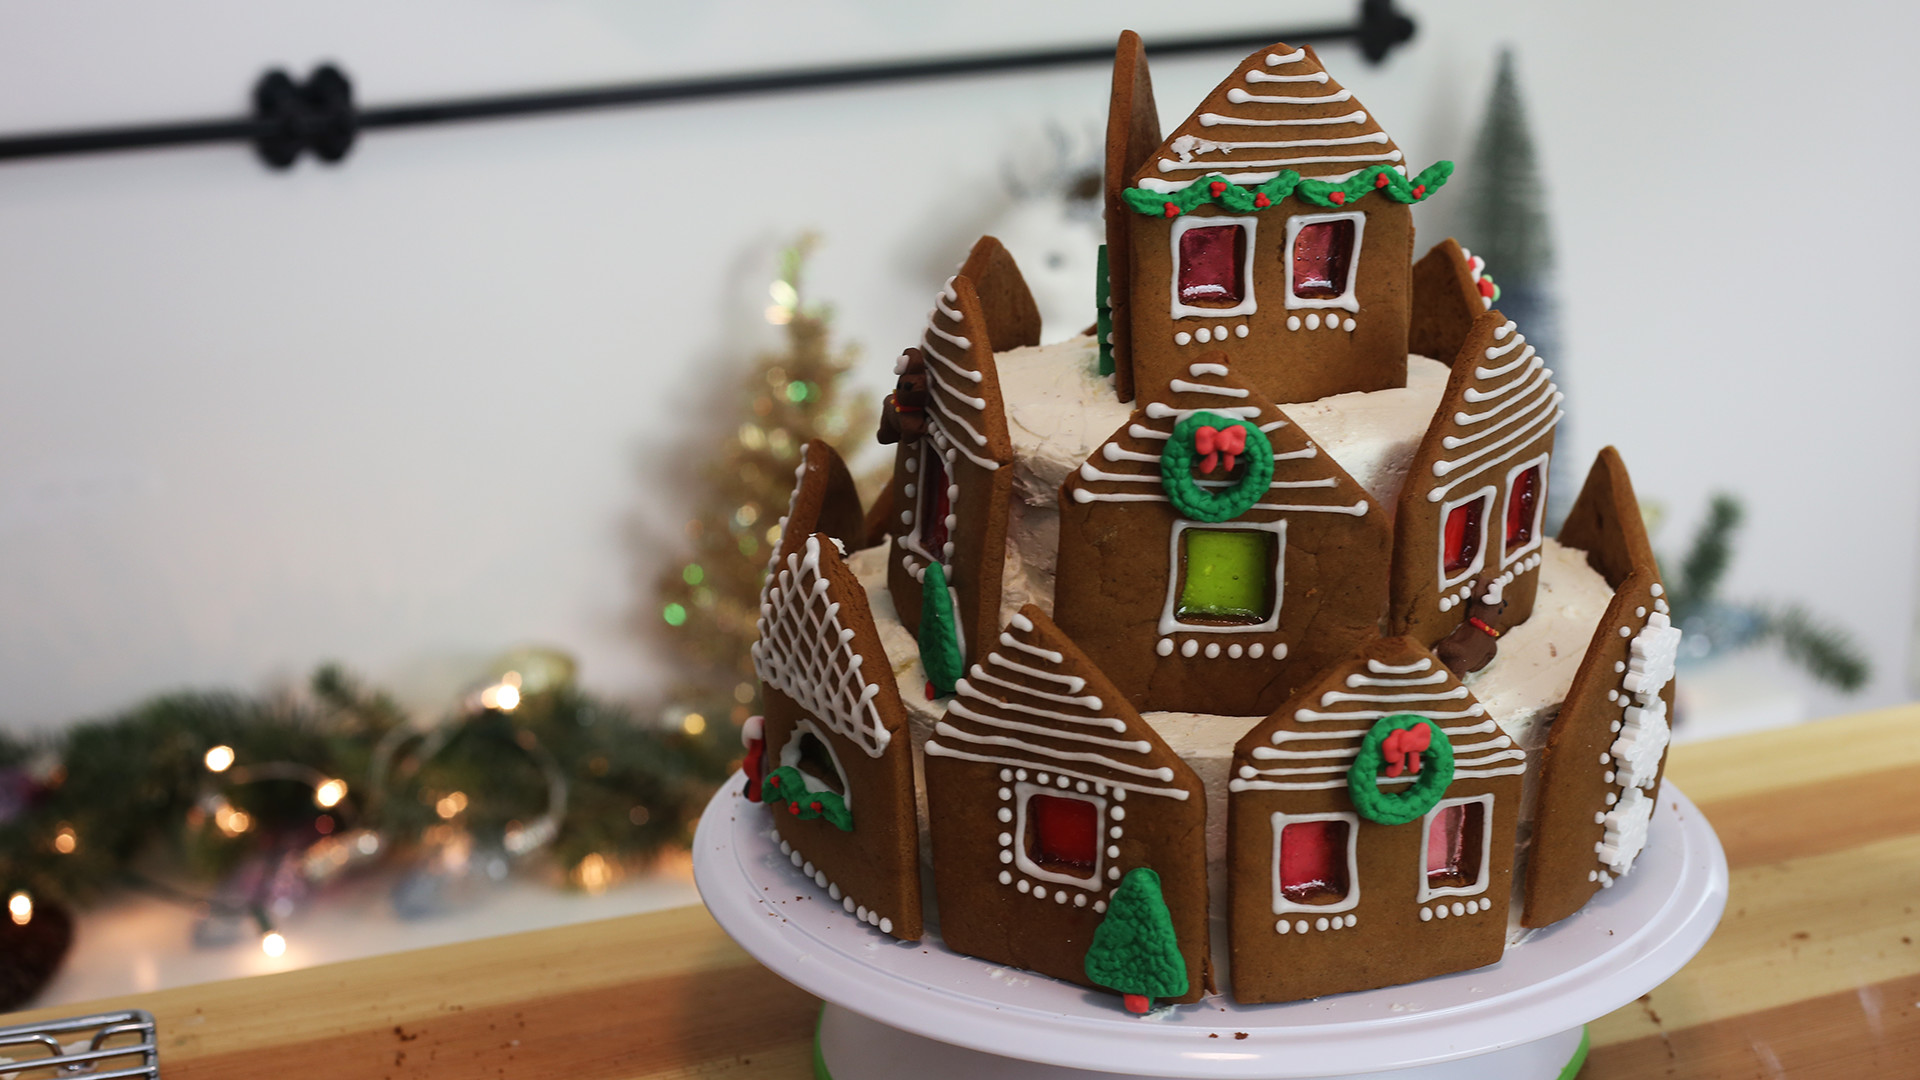 1920x1080 This moist chocolate gingerbread cake is topped with a gingerbread village  winterscape.